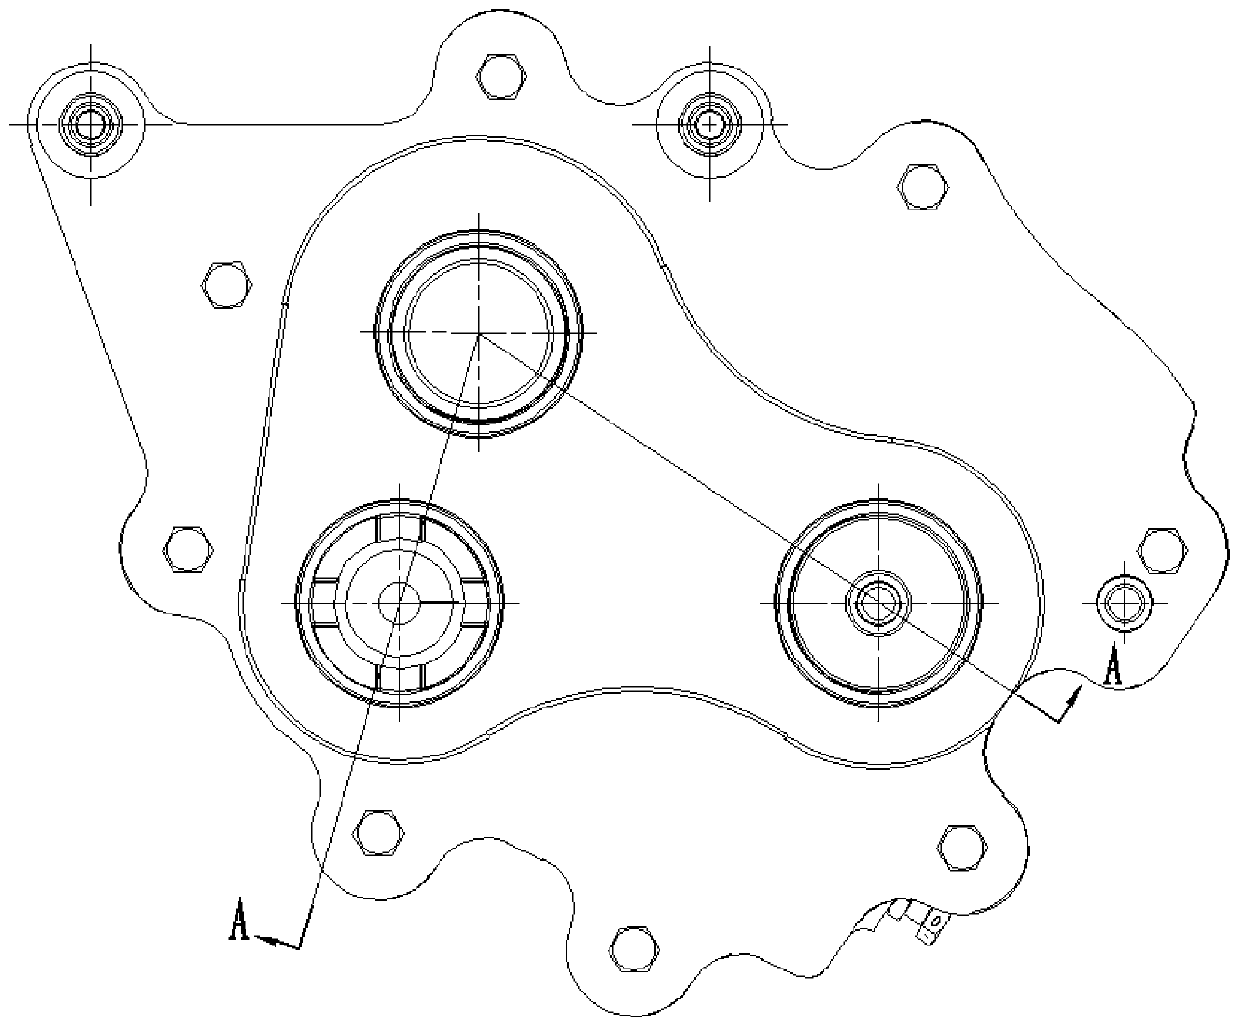 Multistage-transmission speed-reduction clearance-elimination gear box for airplanes and clearance-elimination method